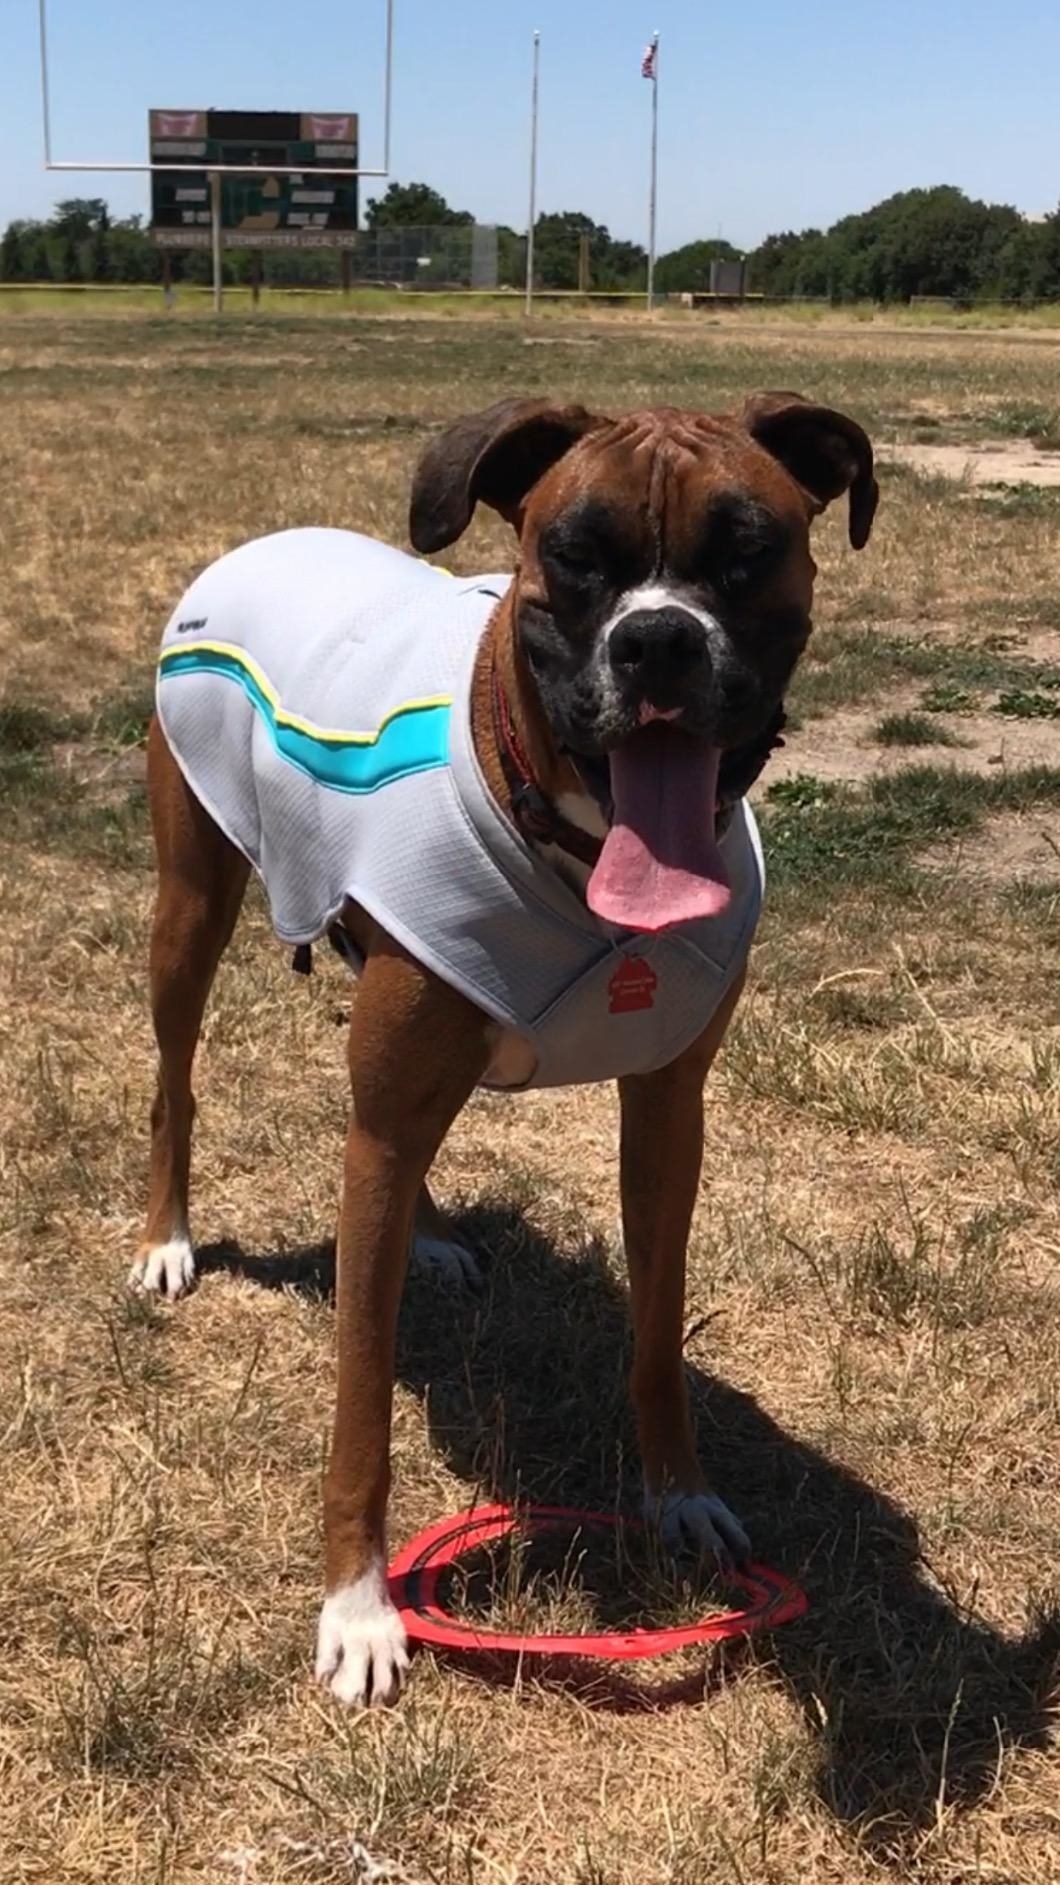 A dog in the vest, which is light colored and covers the whole back and stomach, the way a shirt would